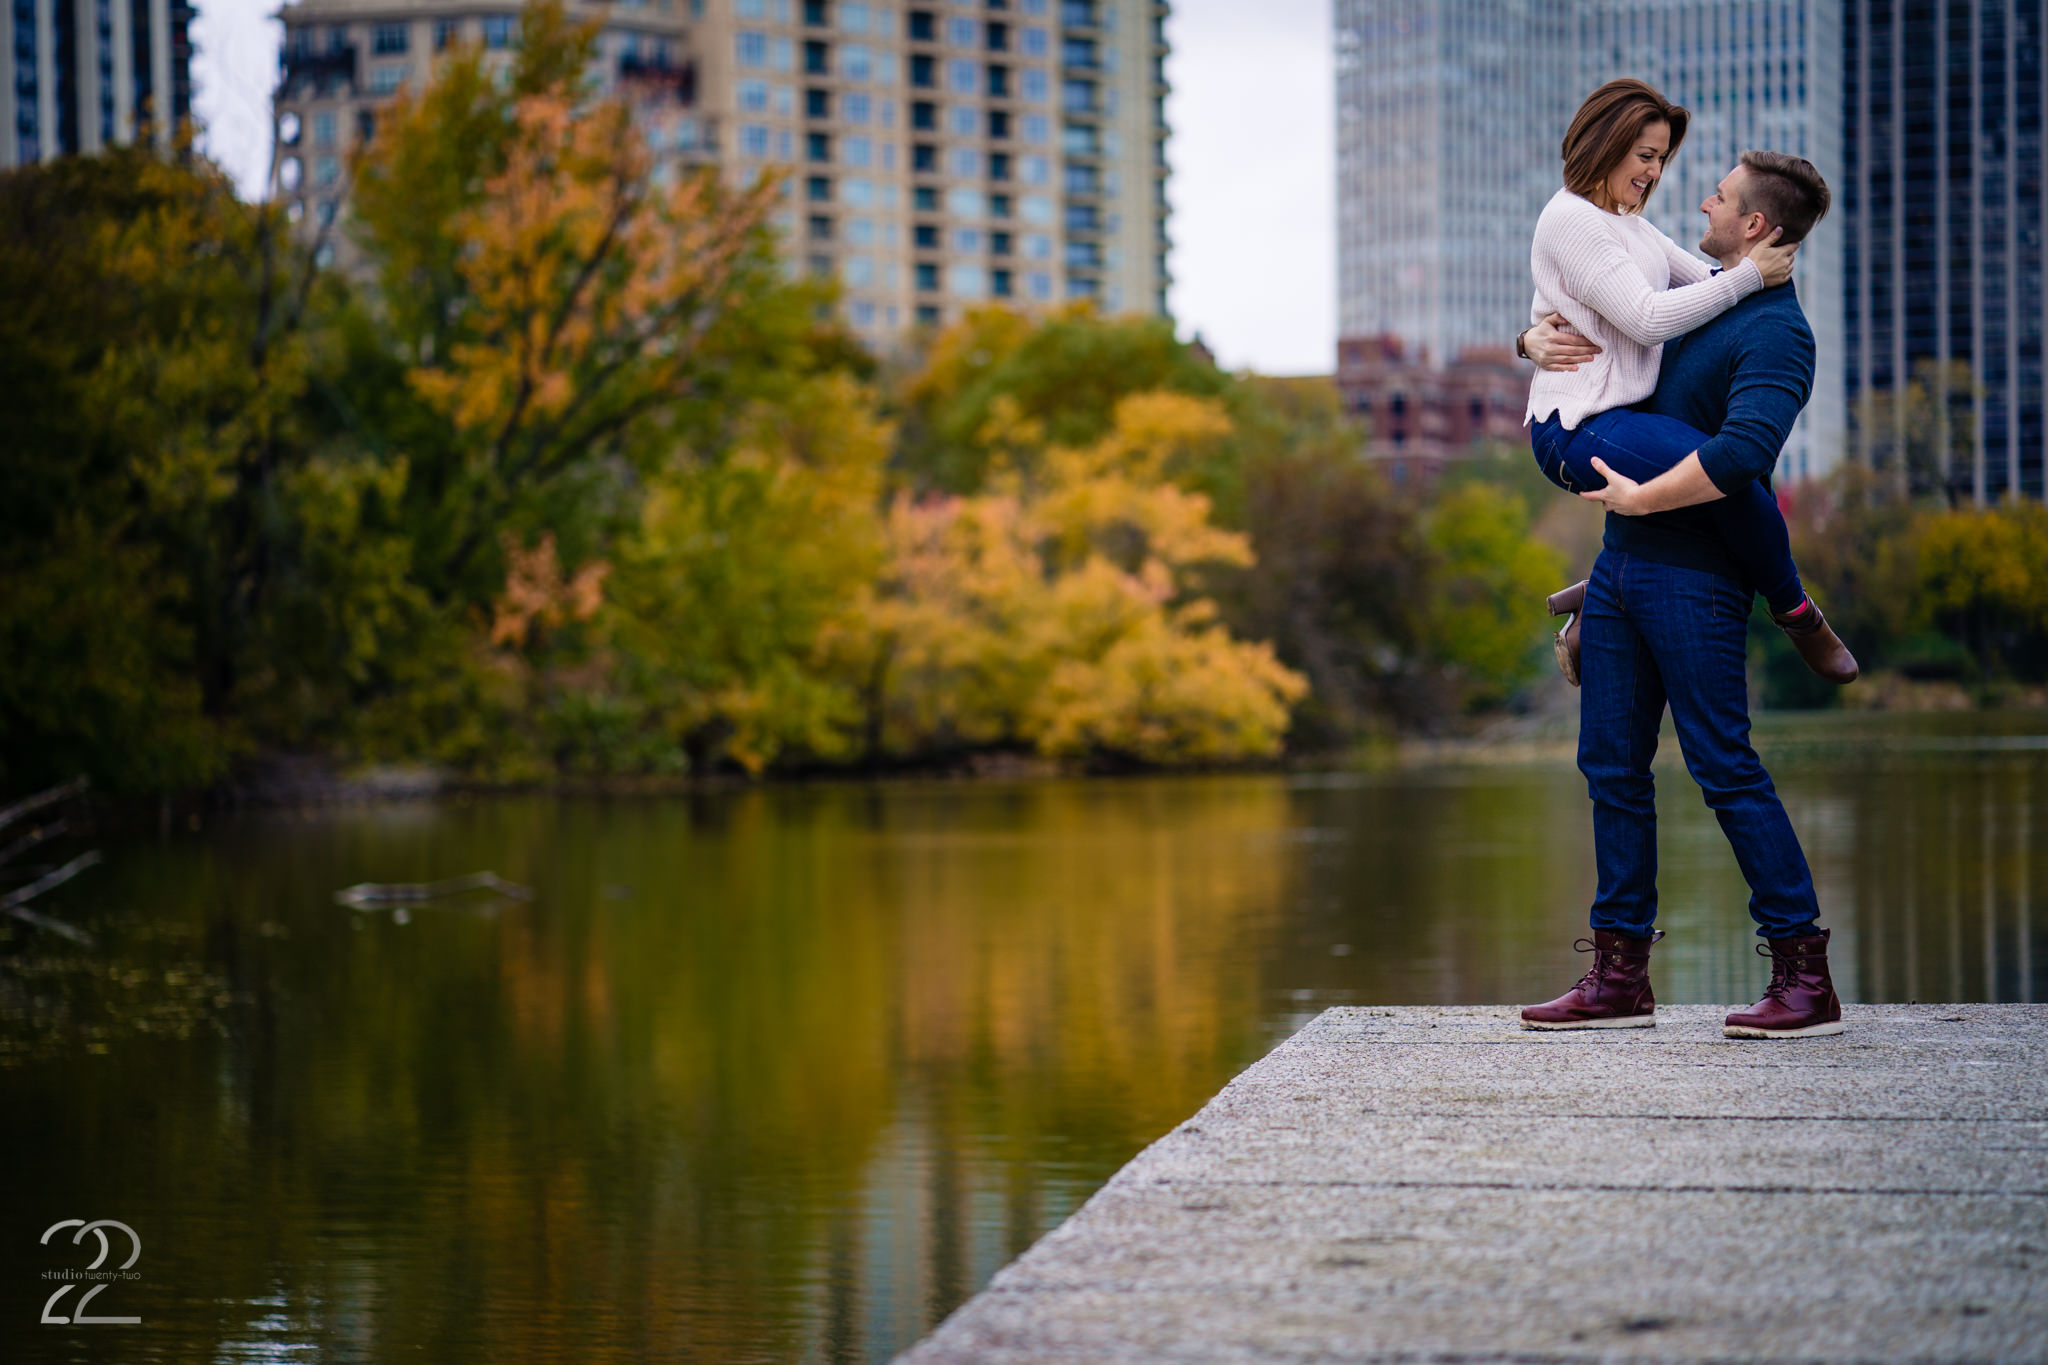  Mixing natural and urban elements is a perfect way to showcase your personality, your home and add some depth and texture to a shoot. The Alfred Caldwell Lily Pond in Chicago, Illinois was the perfect place to combine the elements. 